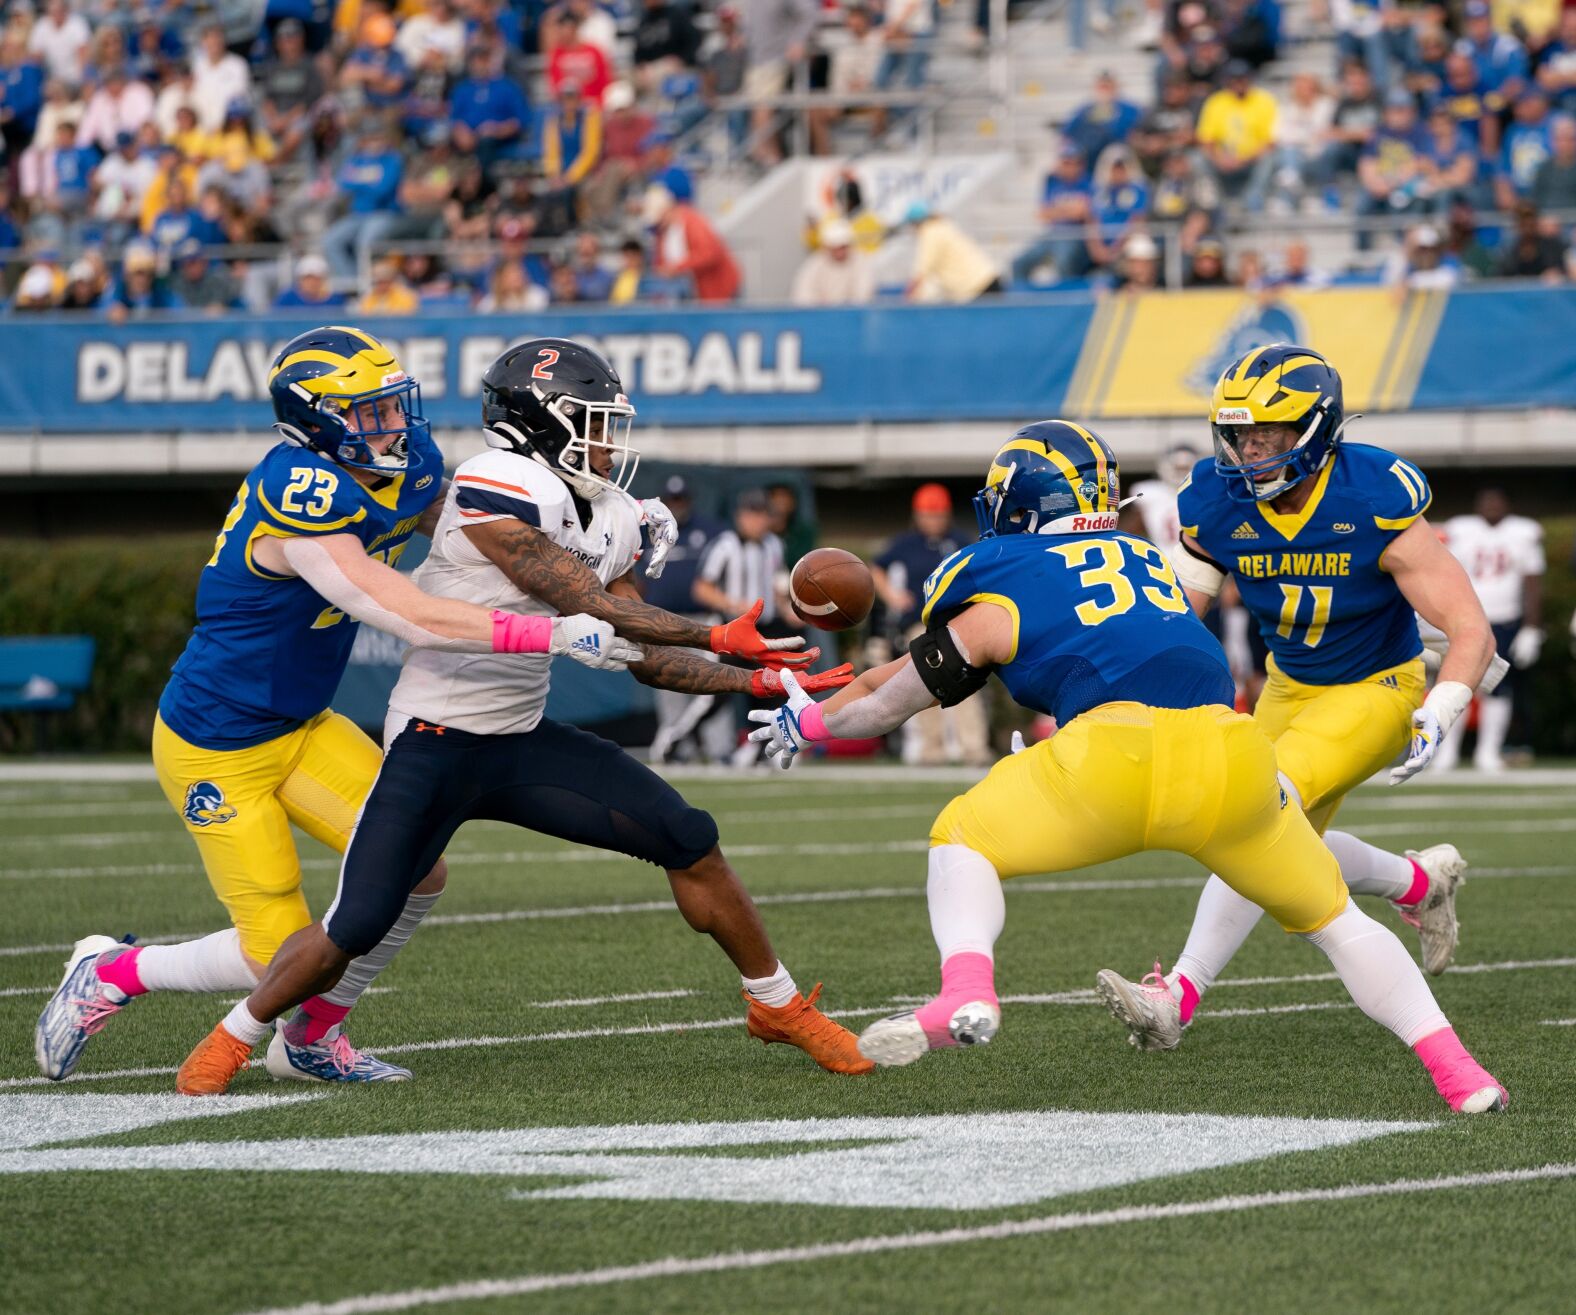 Delaware Football fans will need another streaming service to watch every game this season The Latest from WDEL News wdel